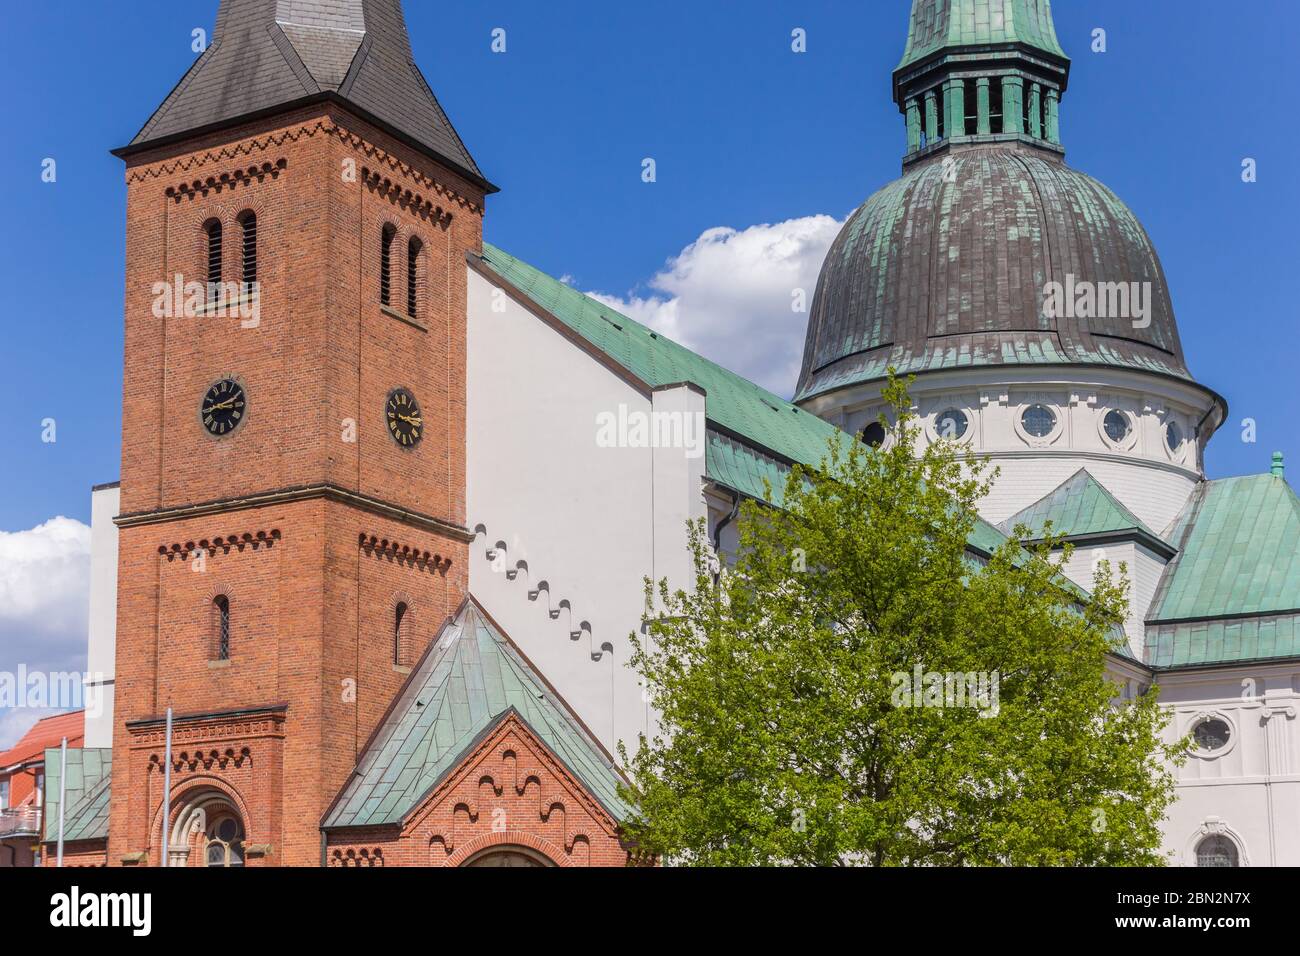 Tower and dome of the Emsland Dom church in Haren, Germany Stock Photo